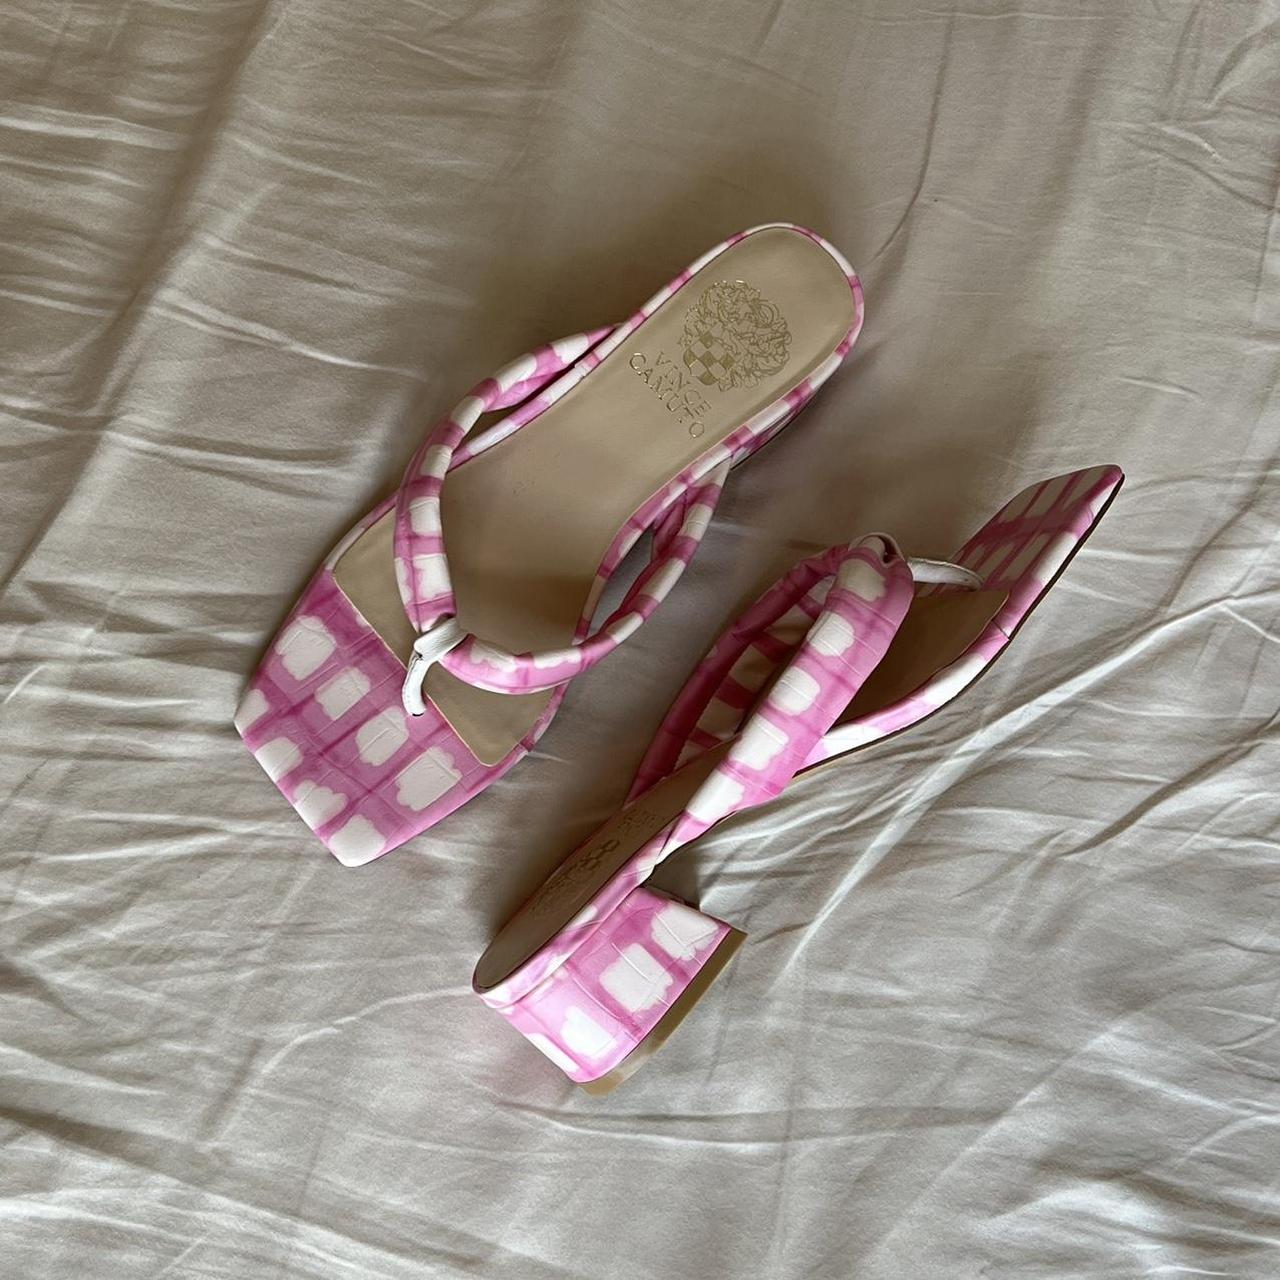 Vince Camuto Women's Pink and White Sandals